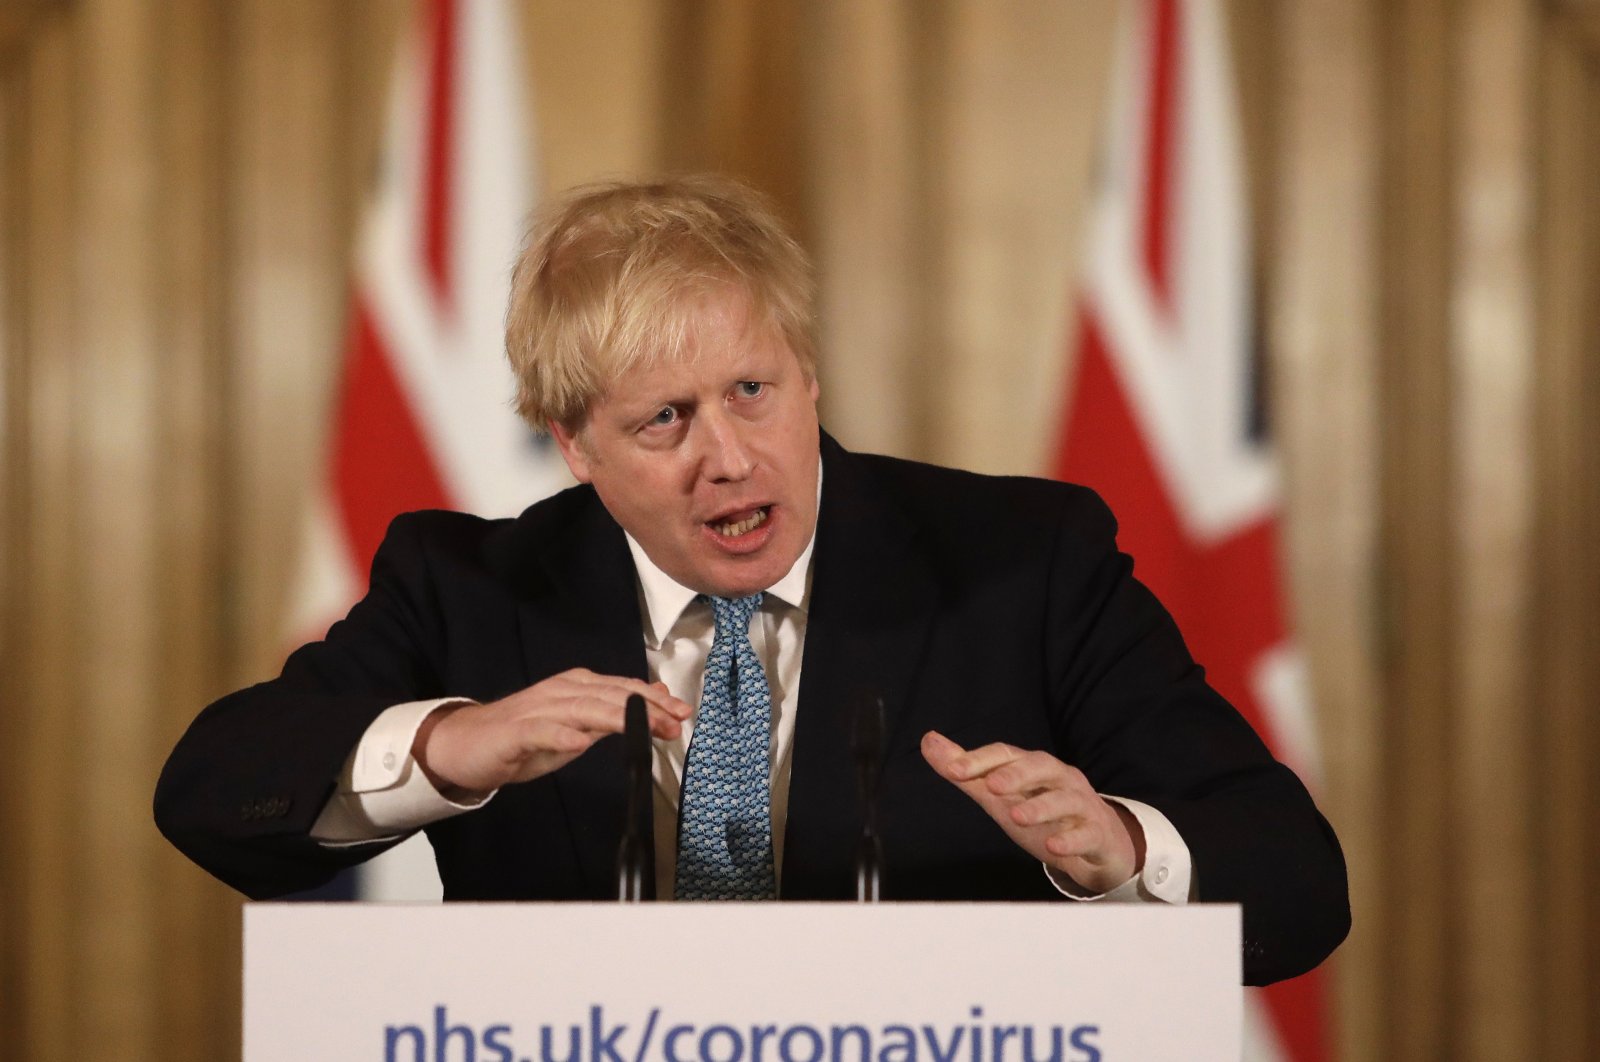 British Prime Minister Boris Johnson gestures as he gives a news conference about the ongoing situation with the COVID-19 outbreak, inside 10 Downing Street in London, U.K., March 17, 2020. (AP Photo)